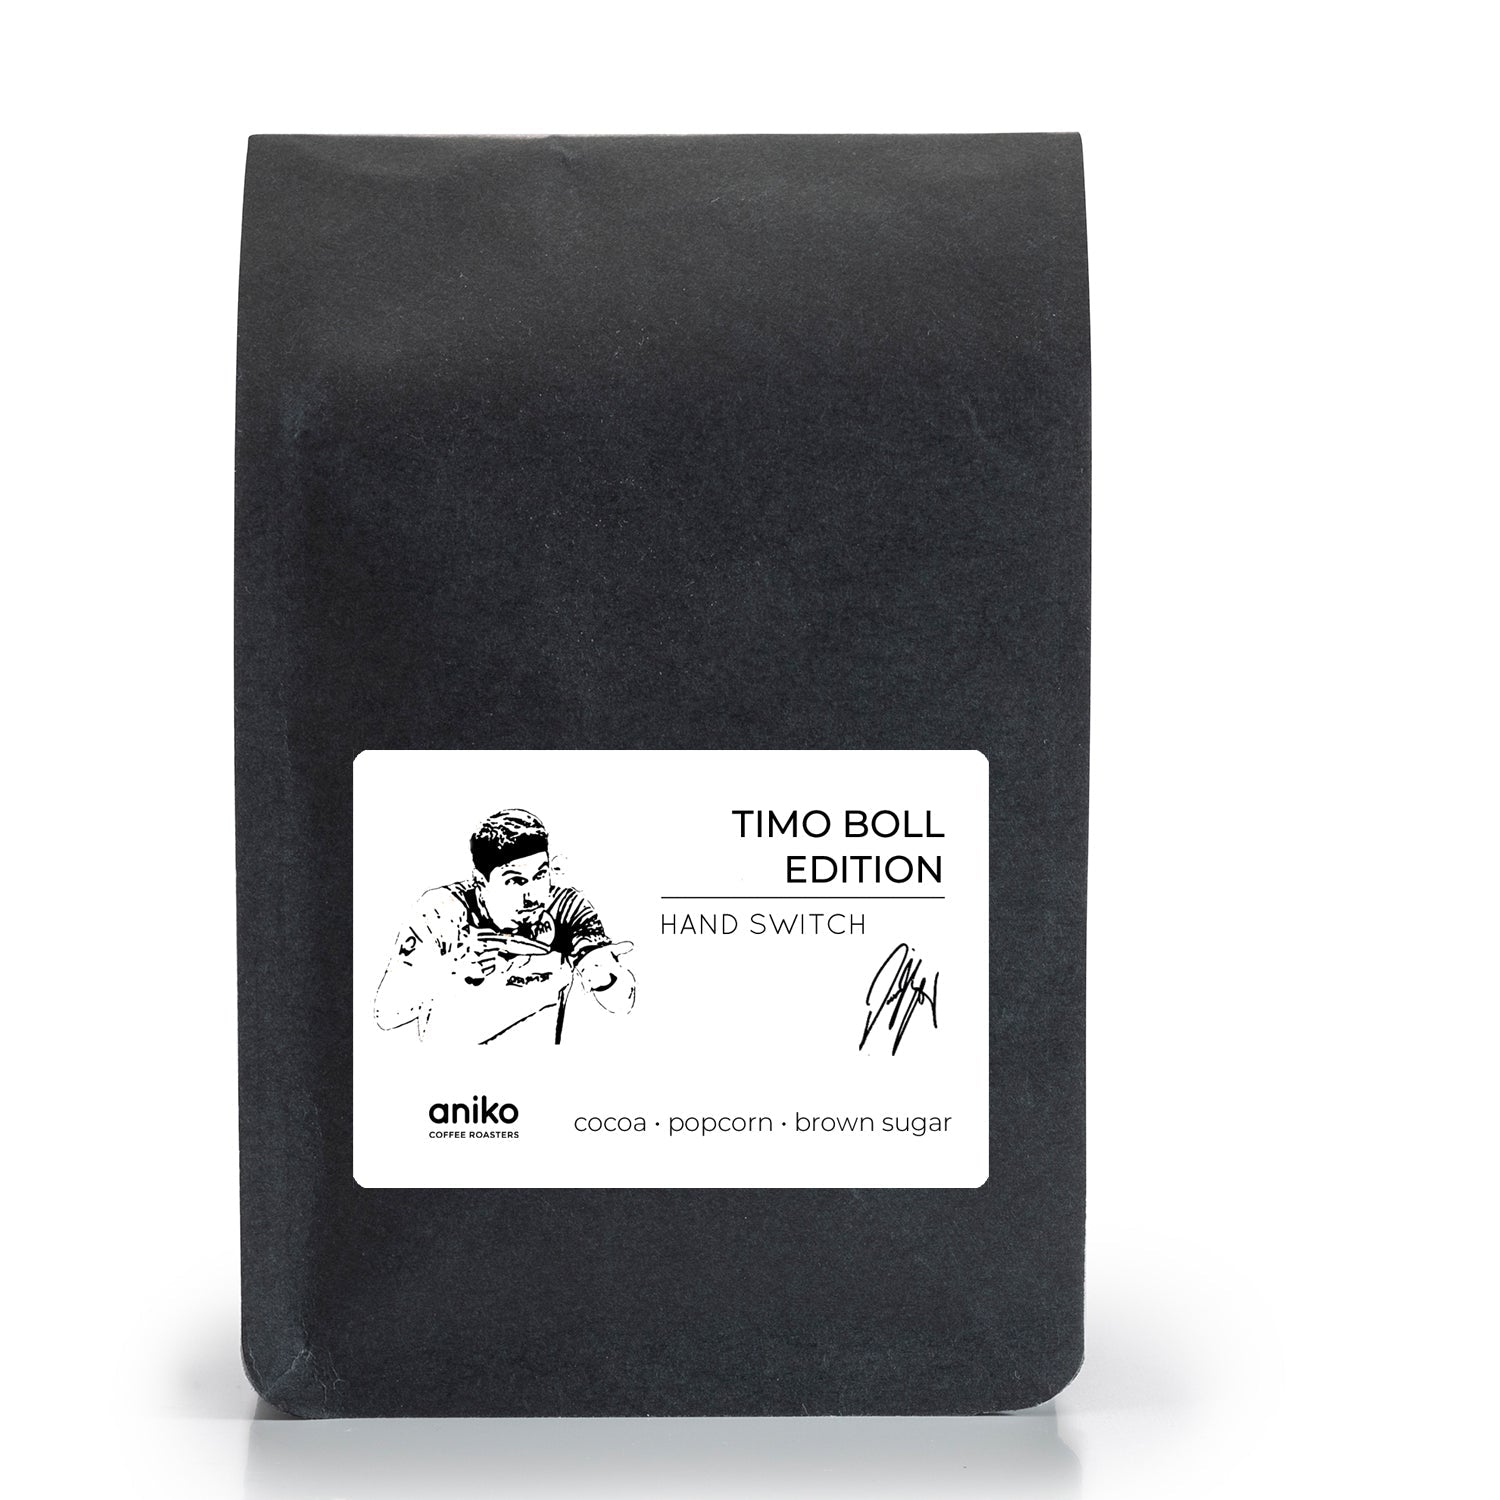 Timo Boll Edition I Hand Switch commercial aniko Coffee Roasters 